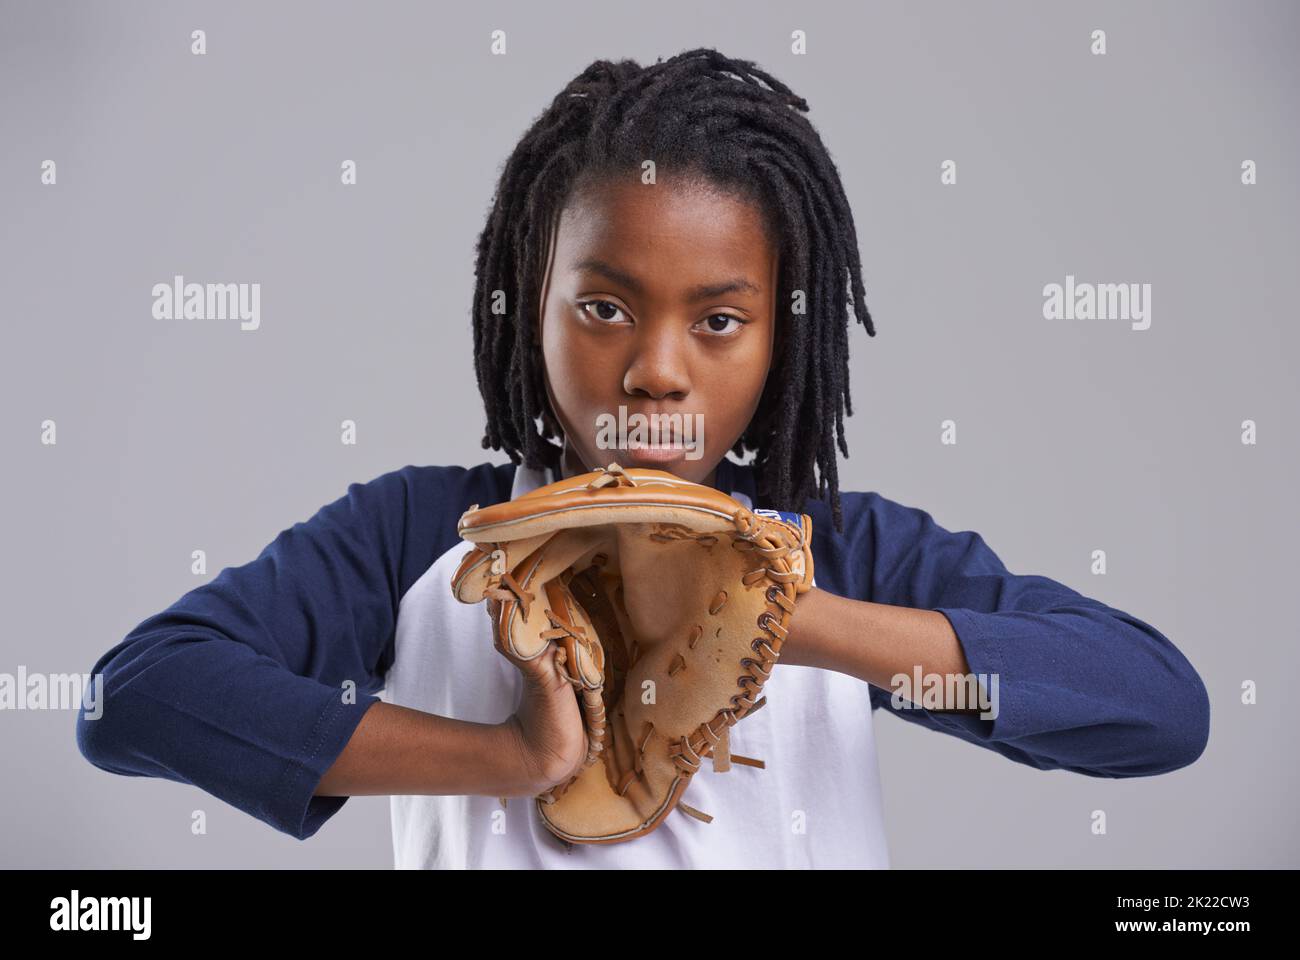 Lets end your game. Studio shot of a young boy with baseball gear. Stock Photo